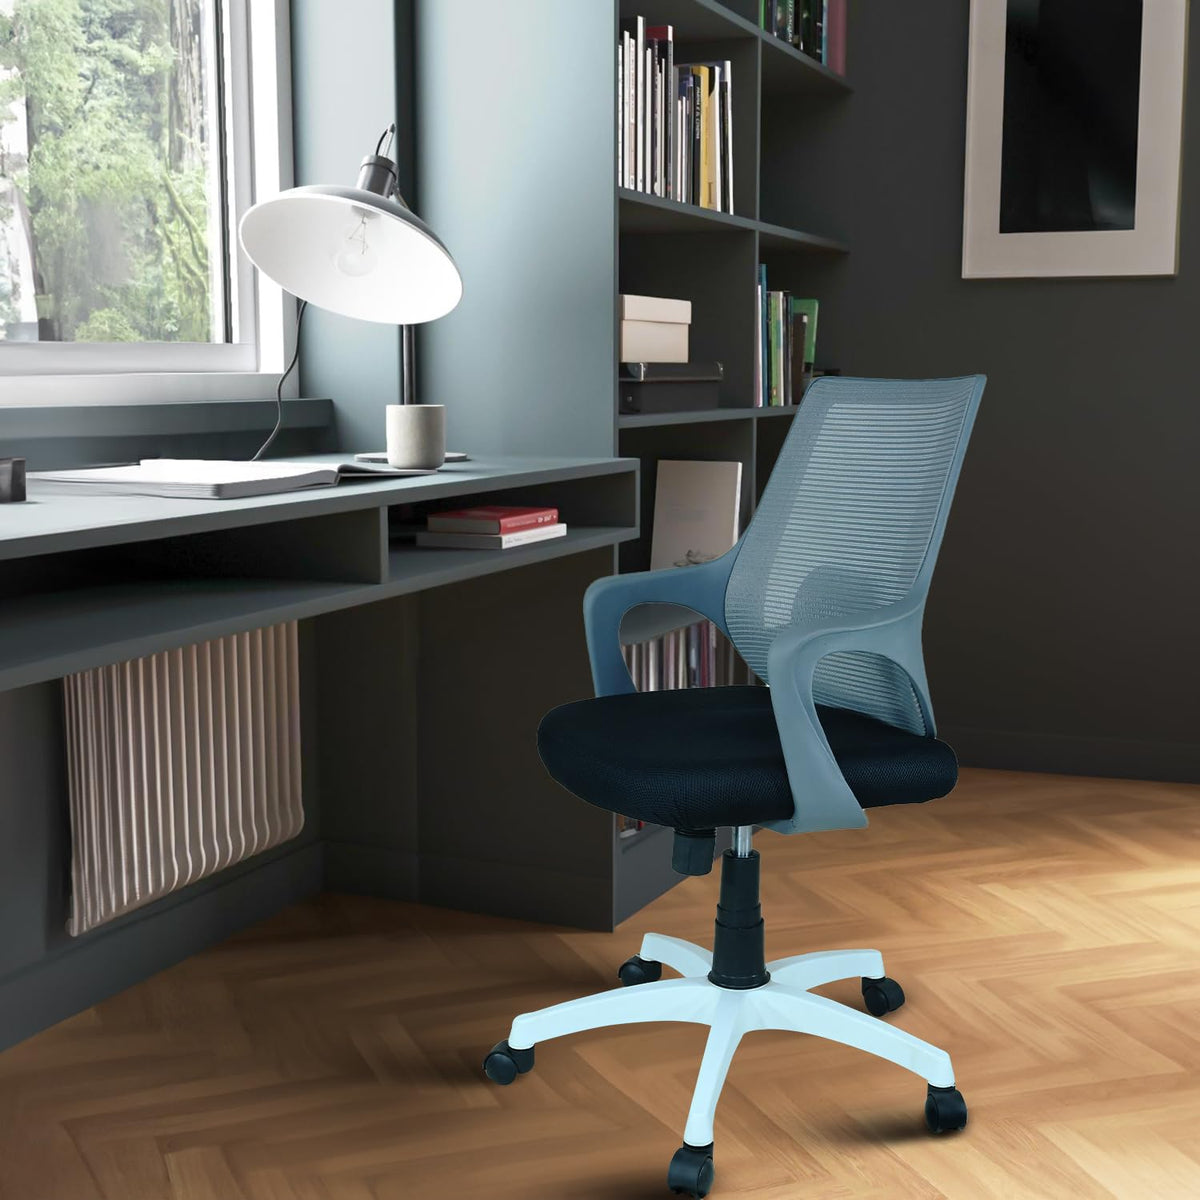 SmileSellers Pearl Mesh Mid-Back Ergonomic Office Chair | Study Chair | Revolving Chair | Computer Chair | Work from Home